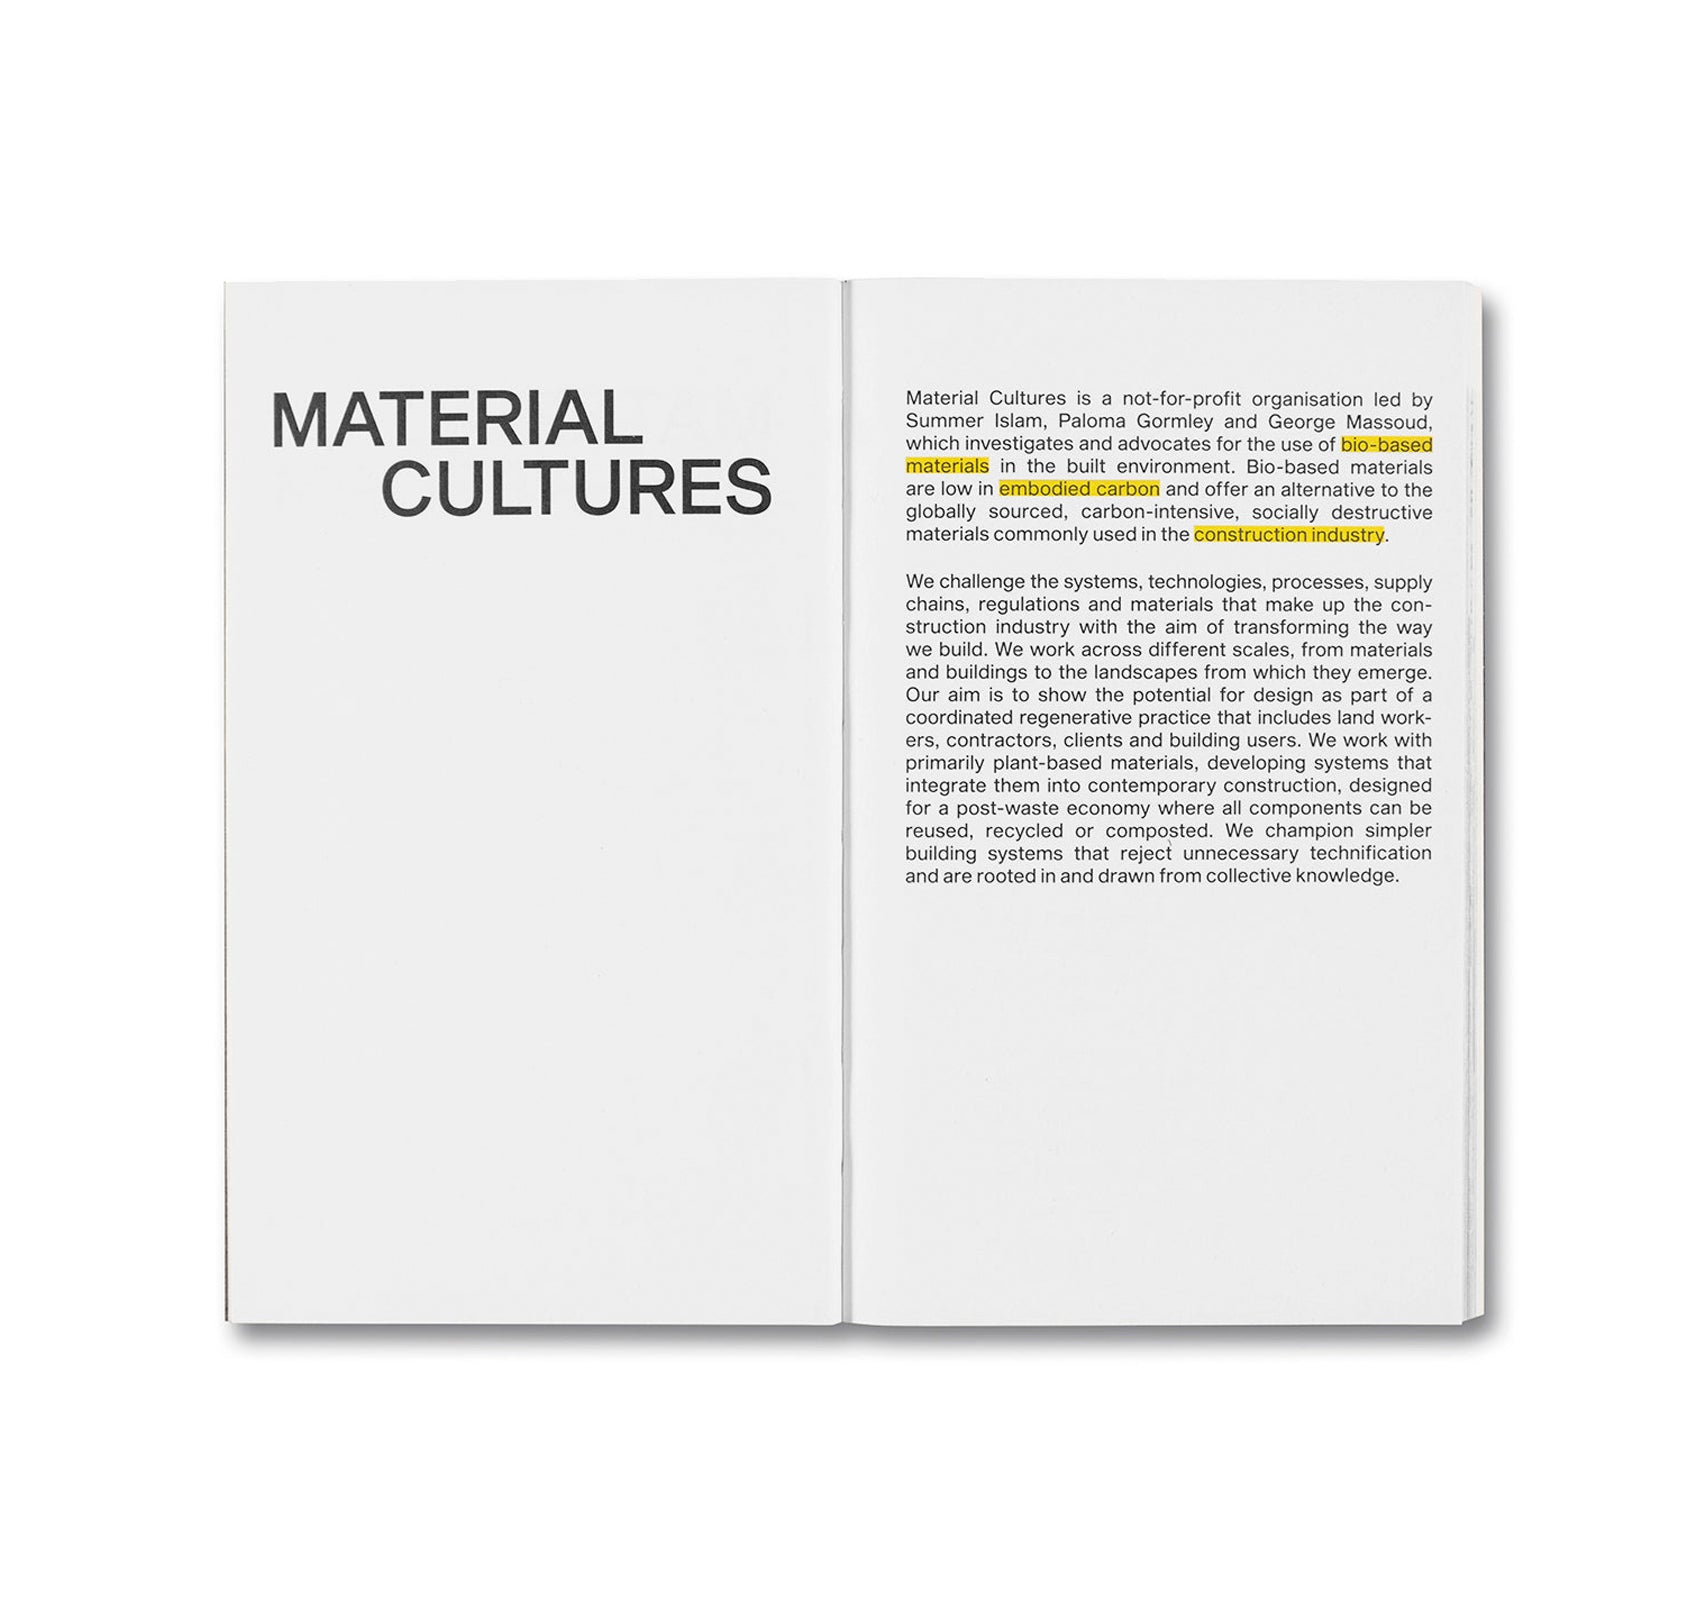 MATERIAL REFORM: BUILDING FOR A POST-CARBON FUTURE by Material Cultures